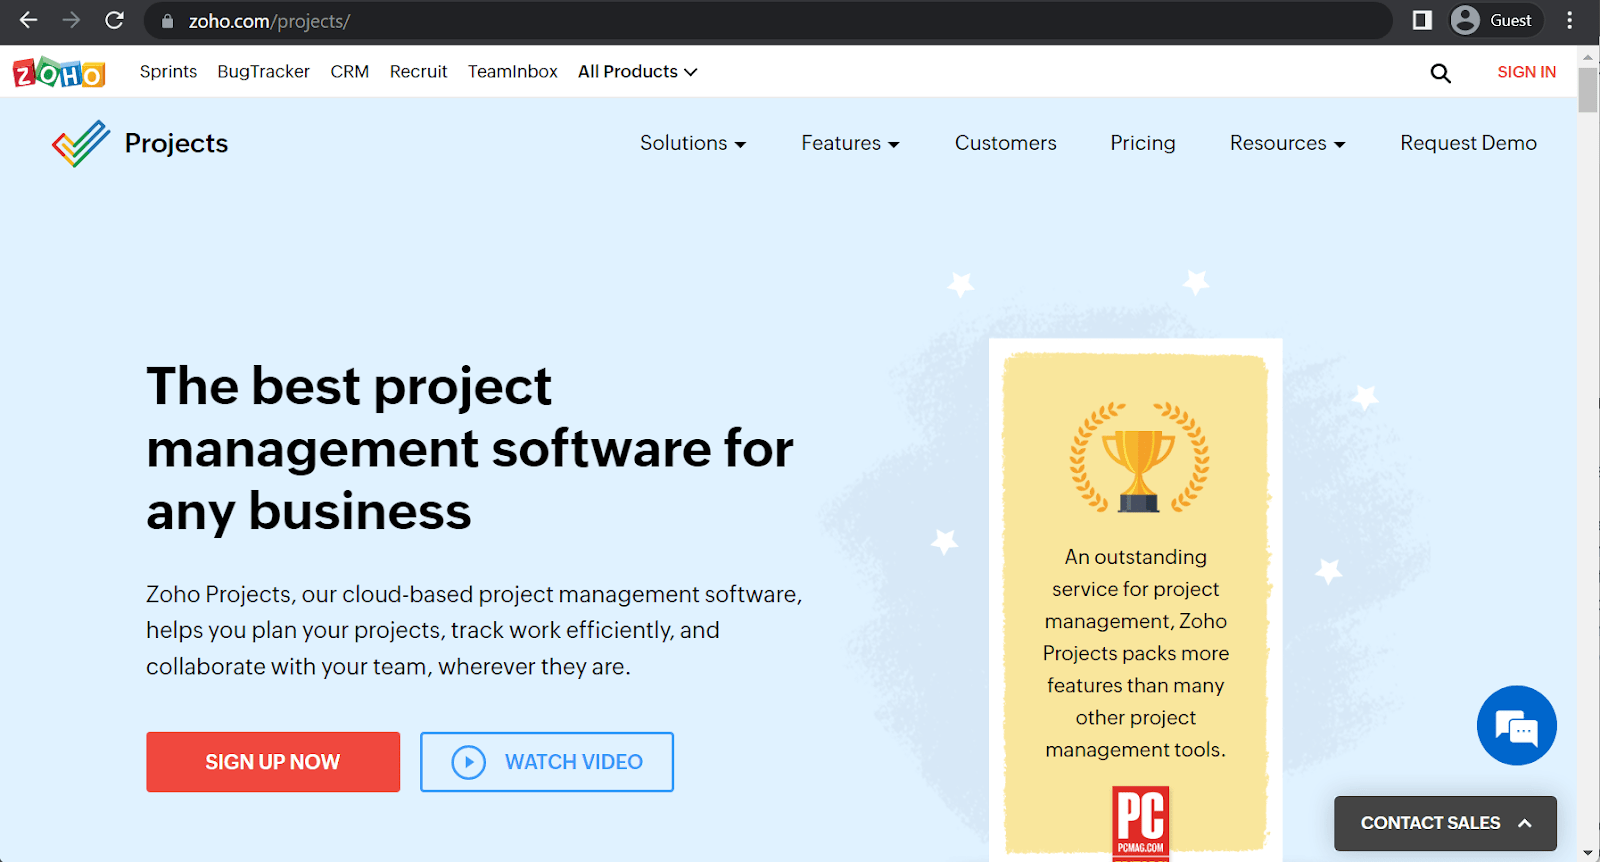 zoho projects landing page